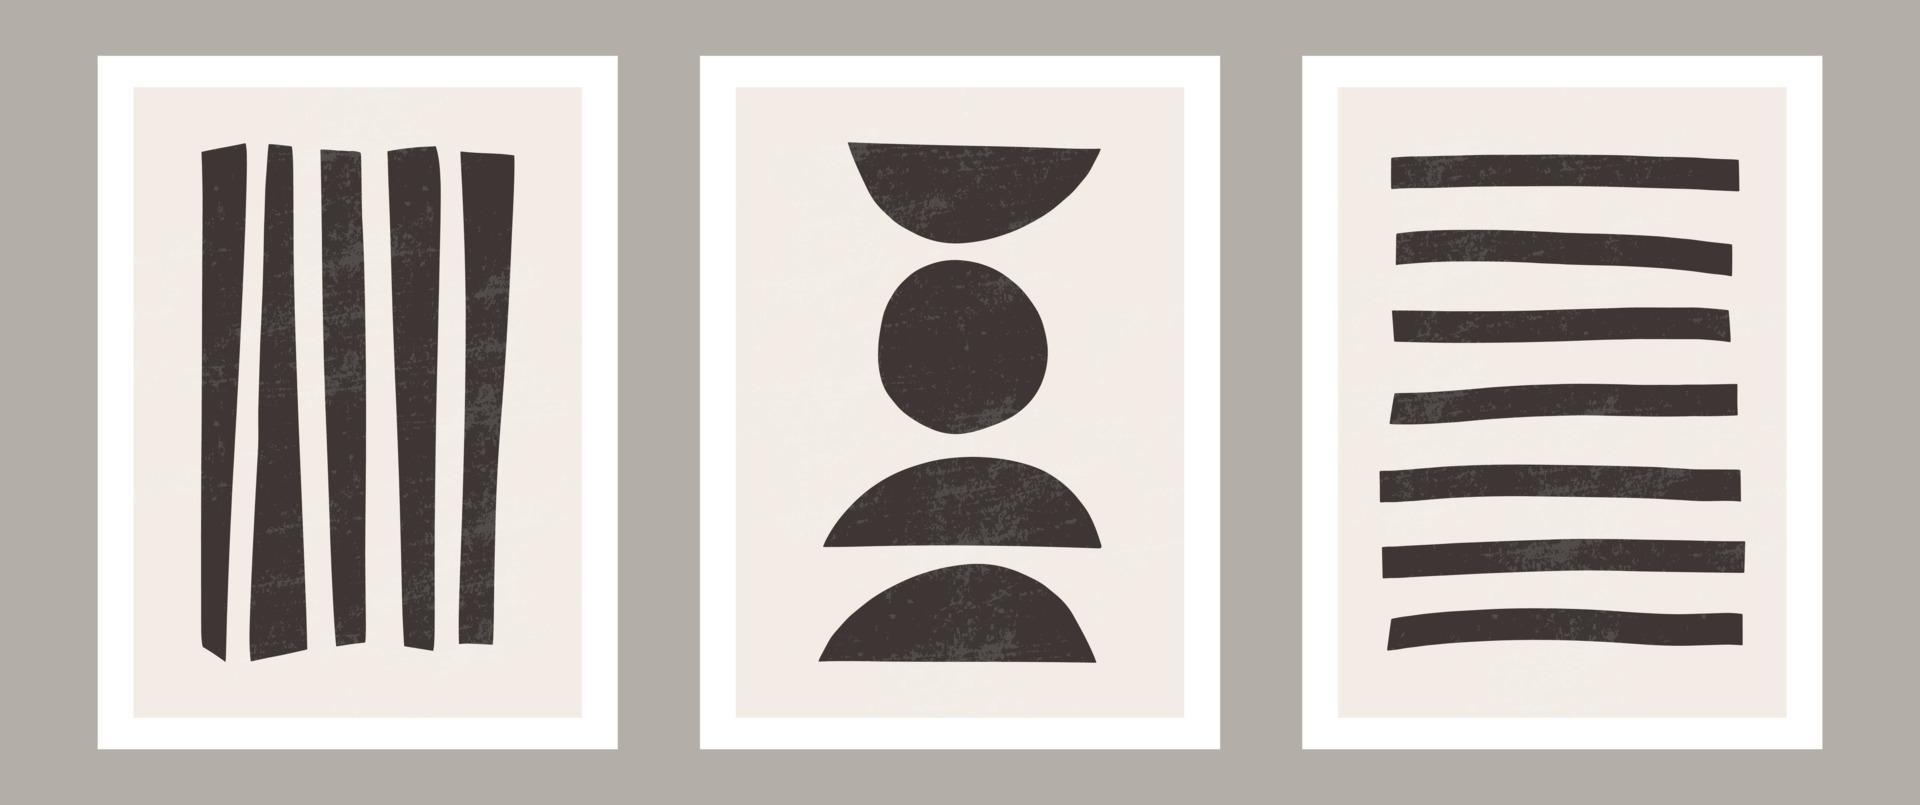 Trendy contemporary Abstract wall art, Set of 3 boho art prints, Minimal black shapes on beige. Creative Mid-century geometric minimalist artistic hand painted composition. vector